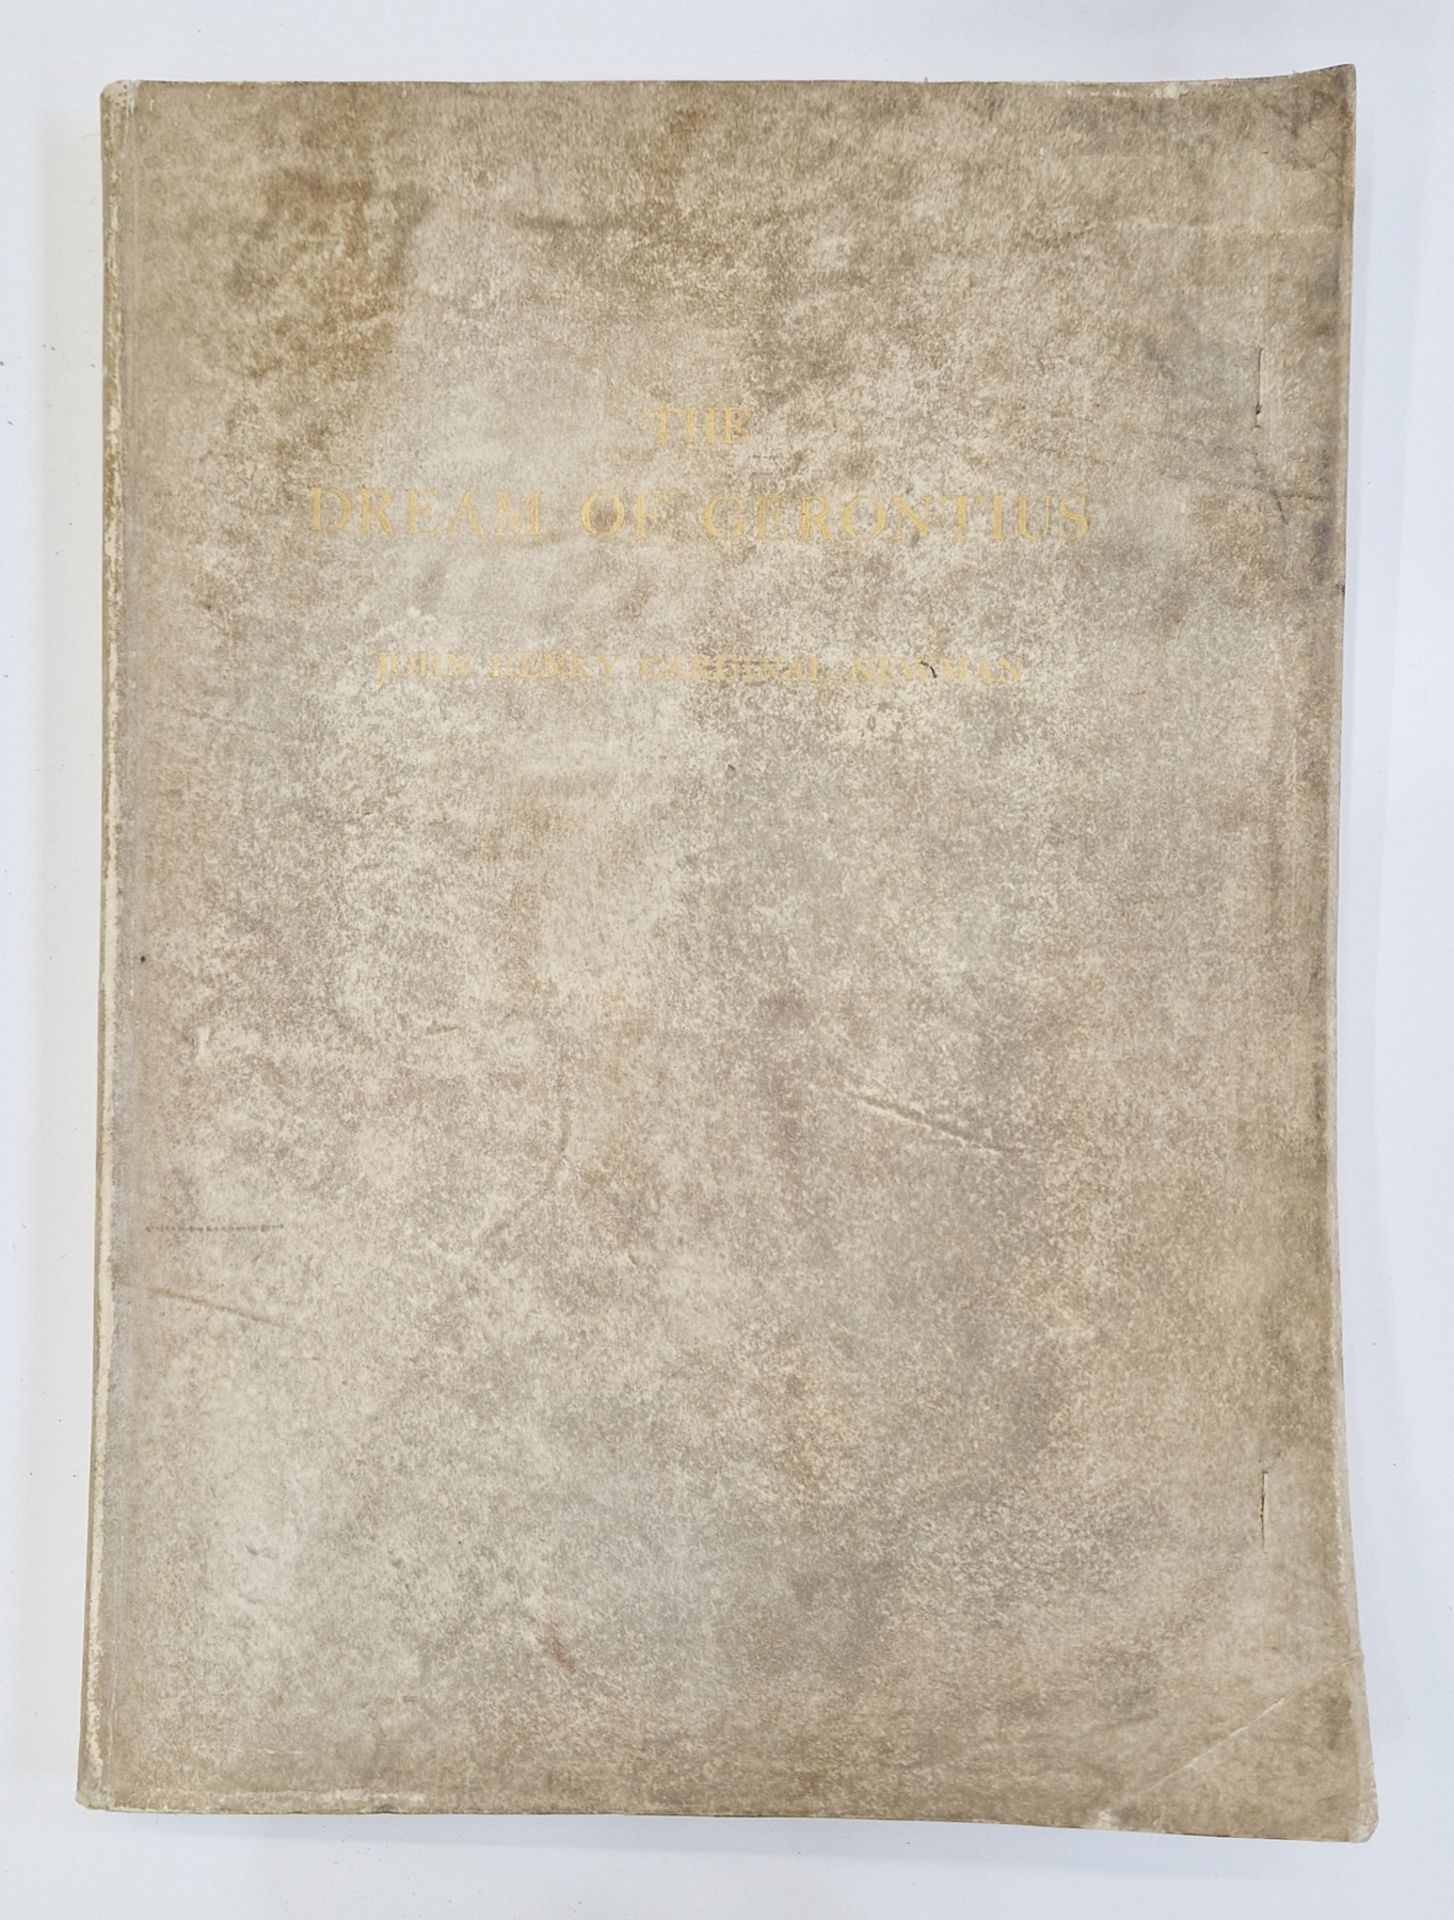 Bindings - Ruskin, John "Selections form the Writings of John Ruskin, First Series 1843-1860" Second - Image 6 of 7